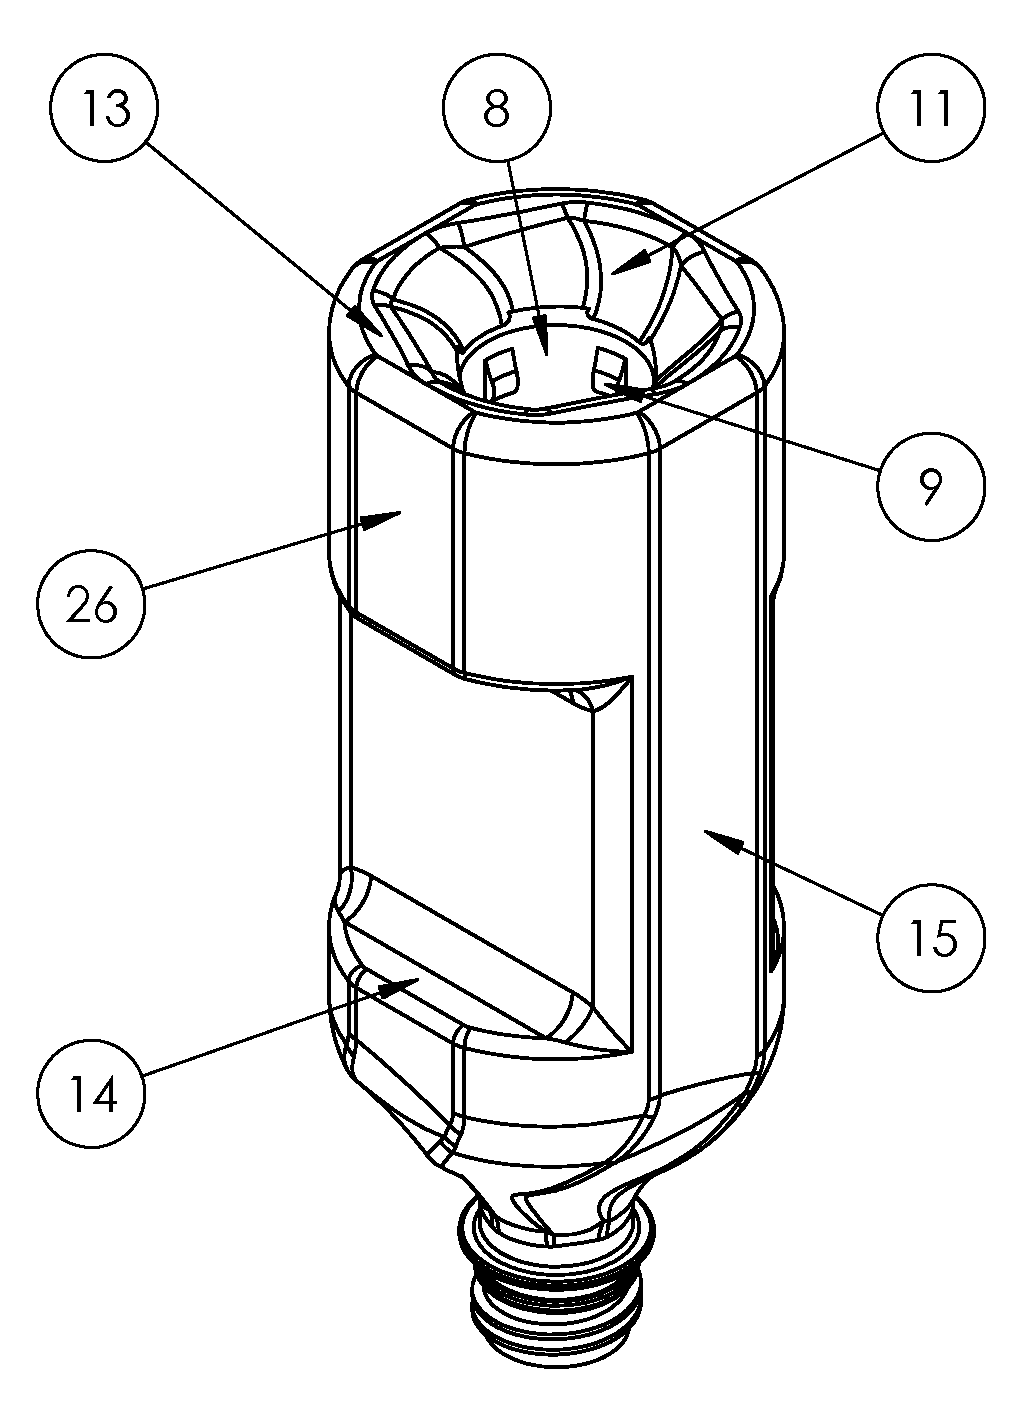 Interconnecting Bottles Utilized to Create Structures